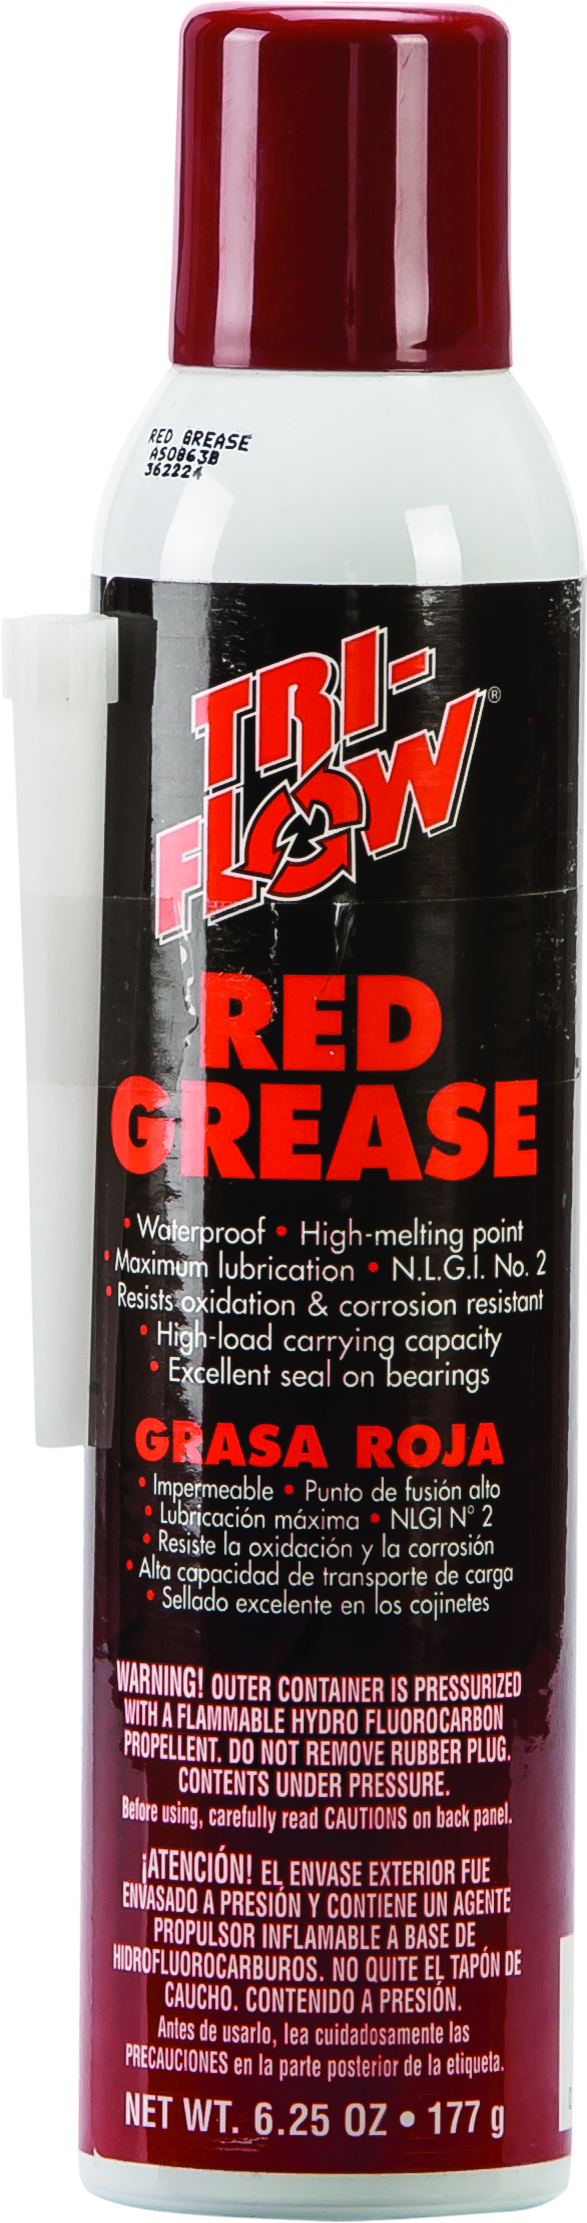 Red Grease Image